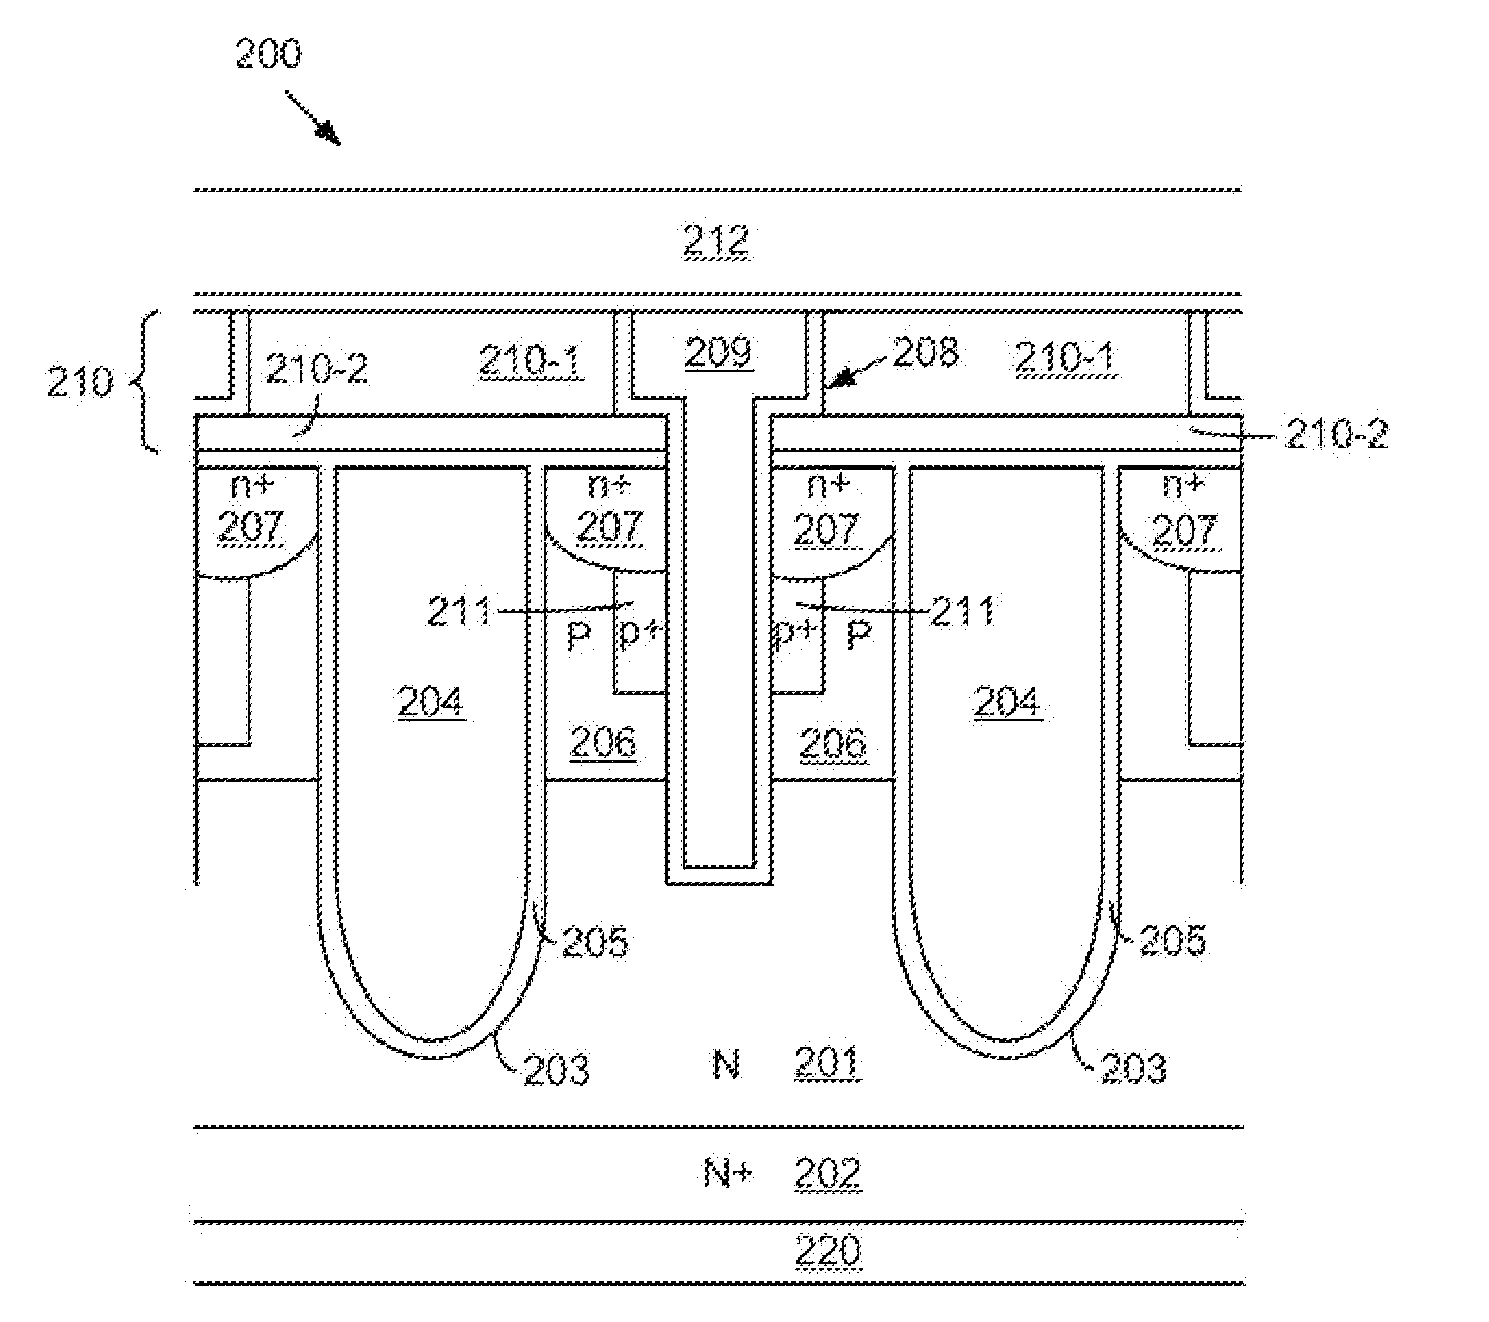 Trench metal oxide semiconductor field effect transistor with embedded schottky rectifier using reduced masks process